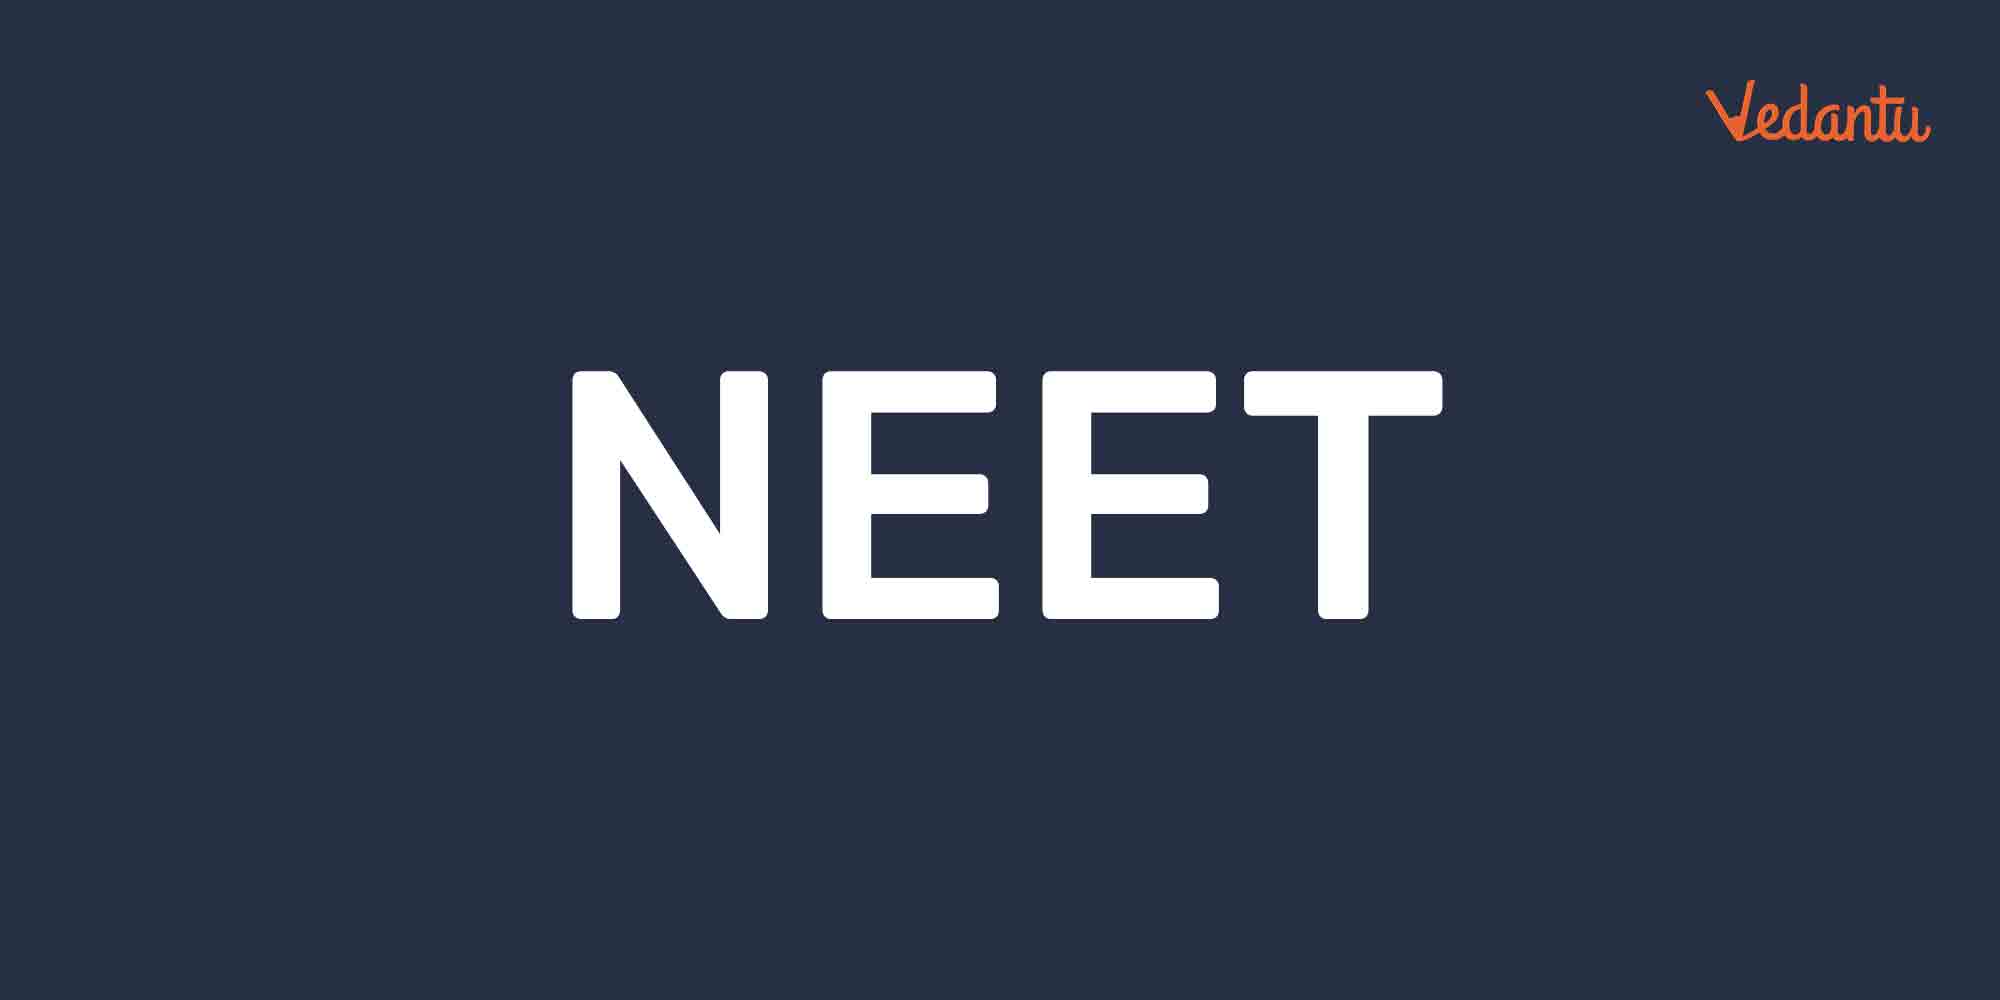 List of All Courses Come Under NEET-UG 2021